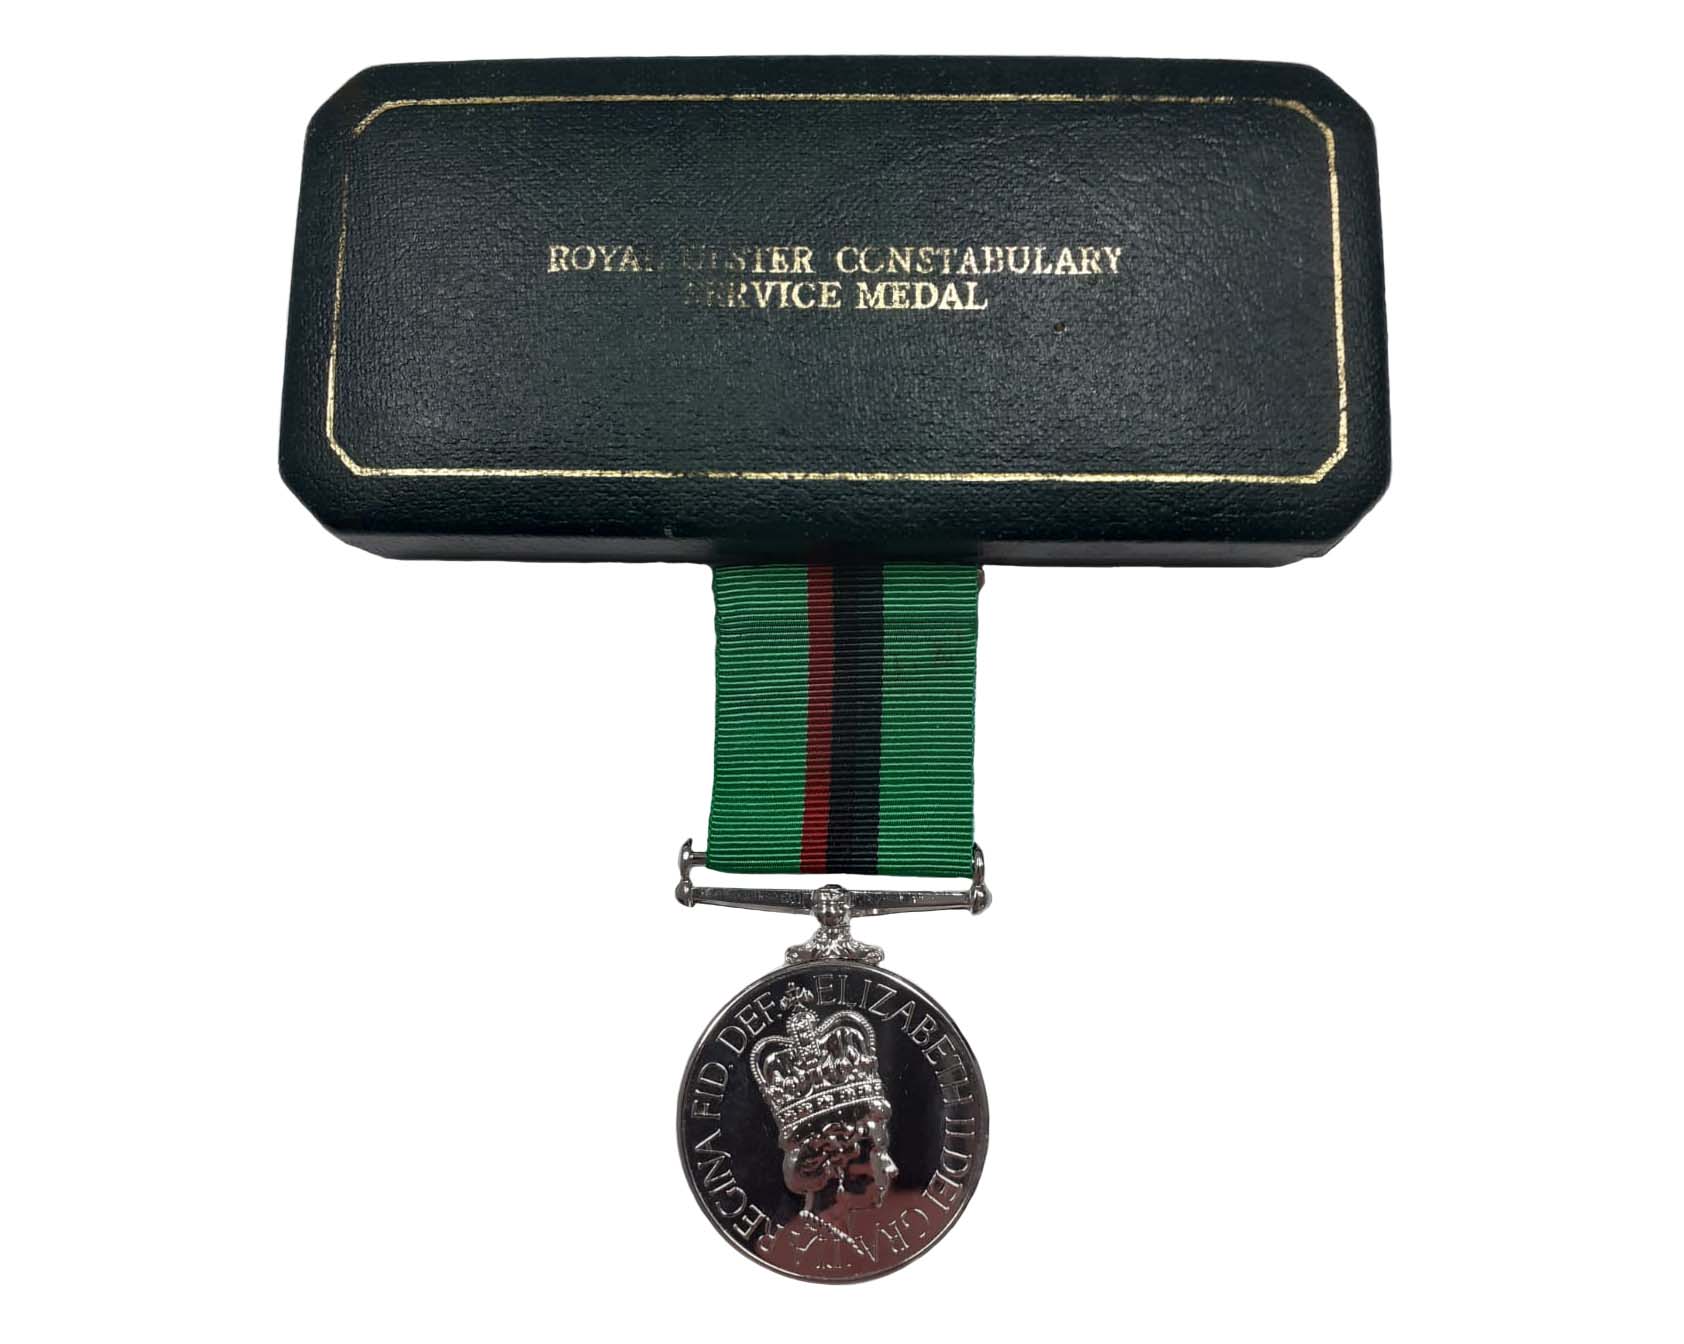 Royal Ulster Constabulary Service Medal to Constable A.S Maclean